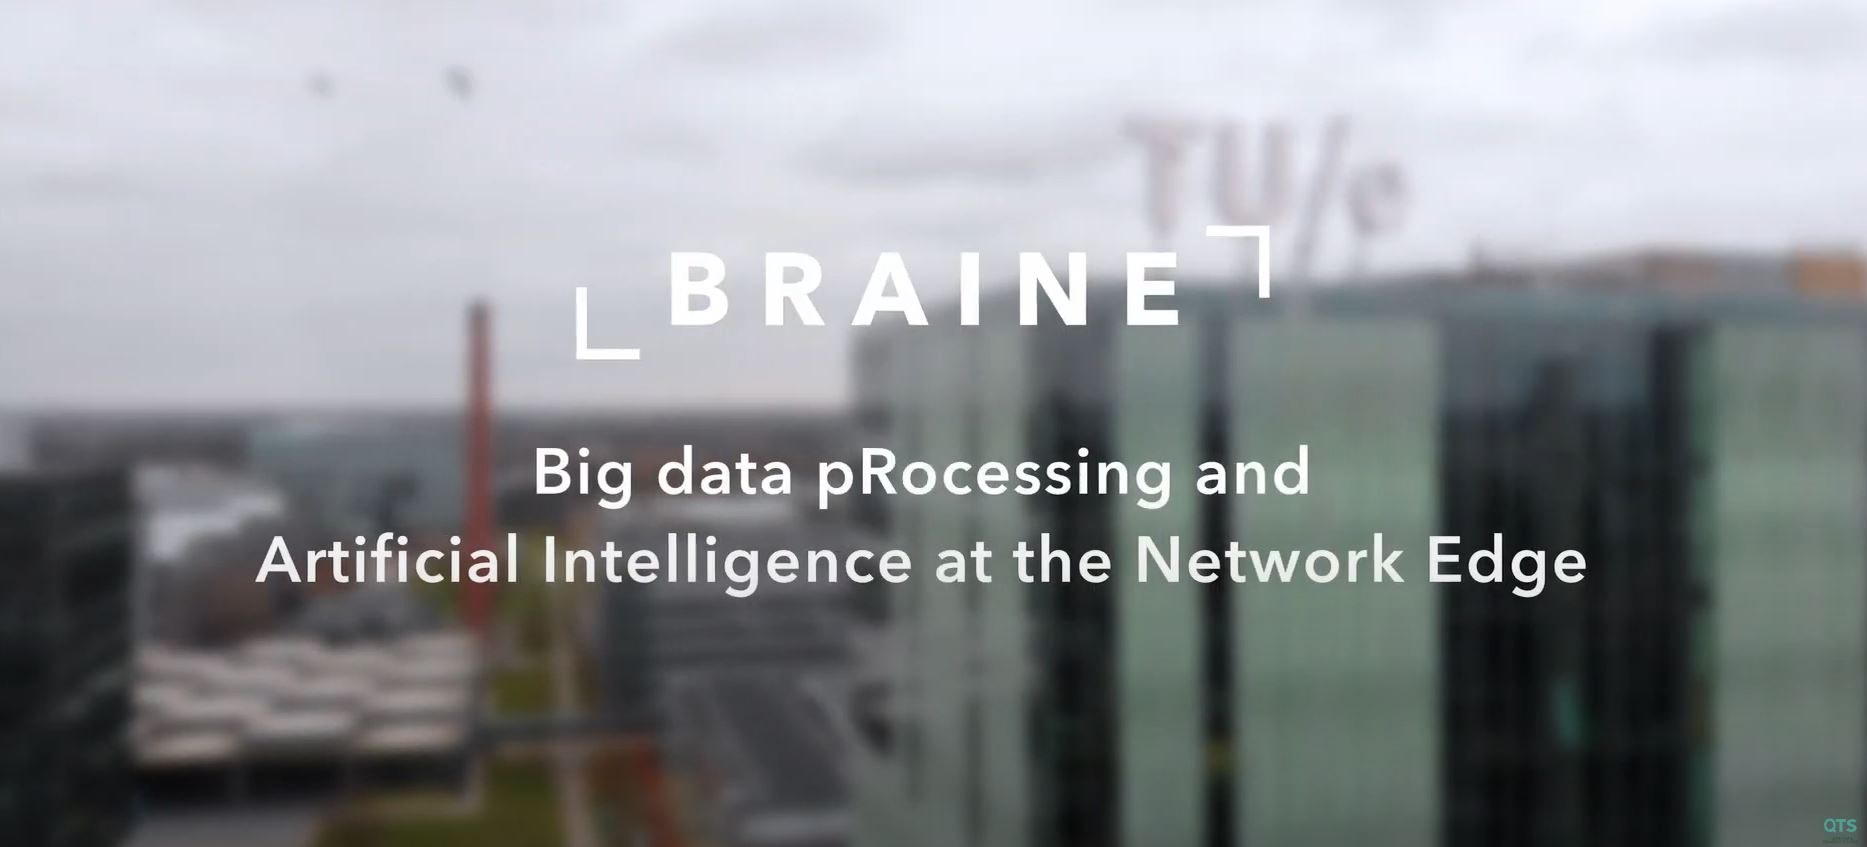 BRAINE – Big Data Processing and Artificial Intelligence at the Network Edge – Tu/e